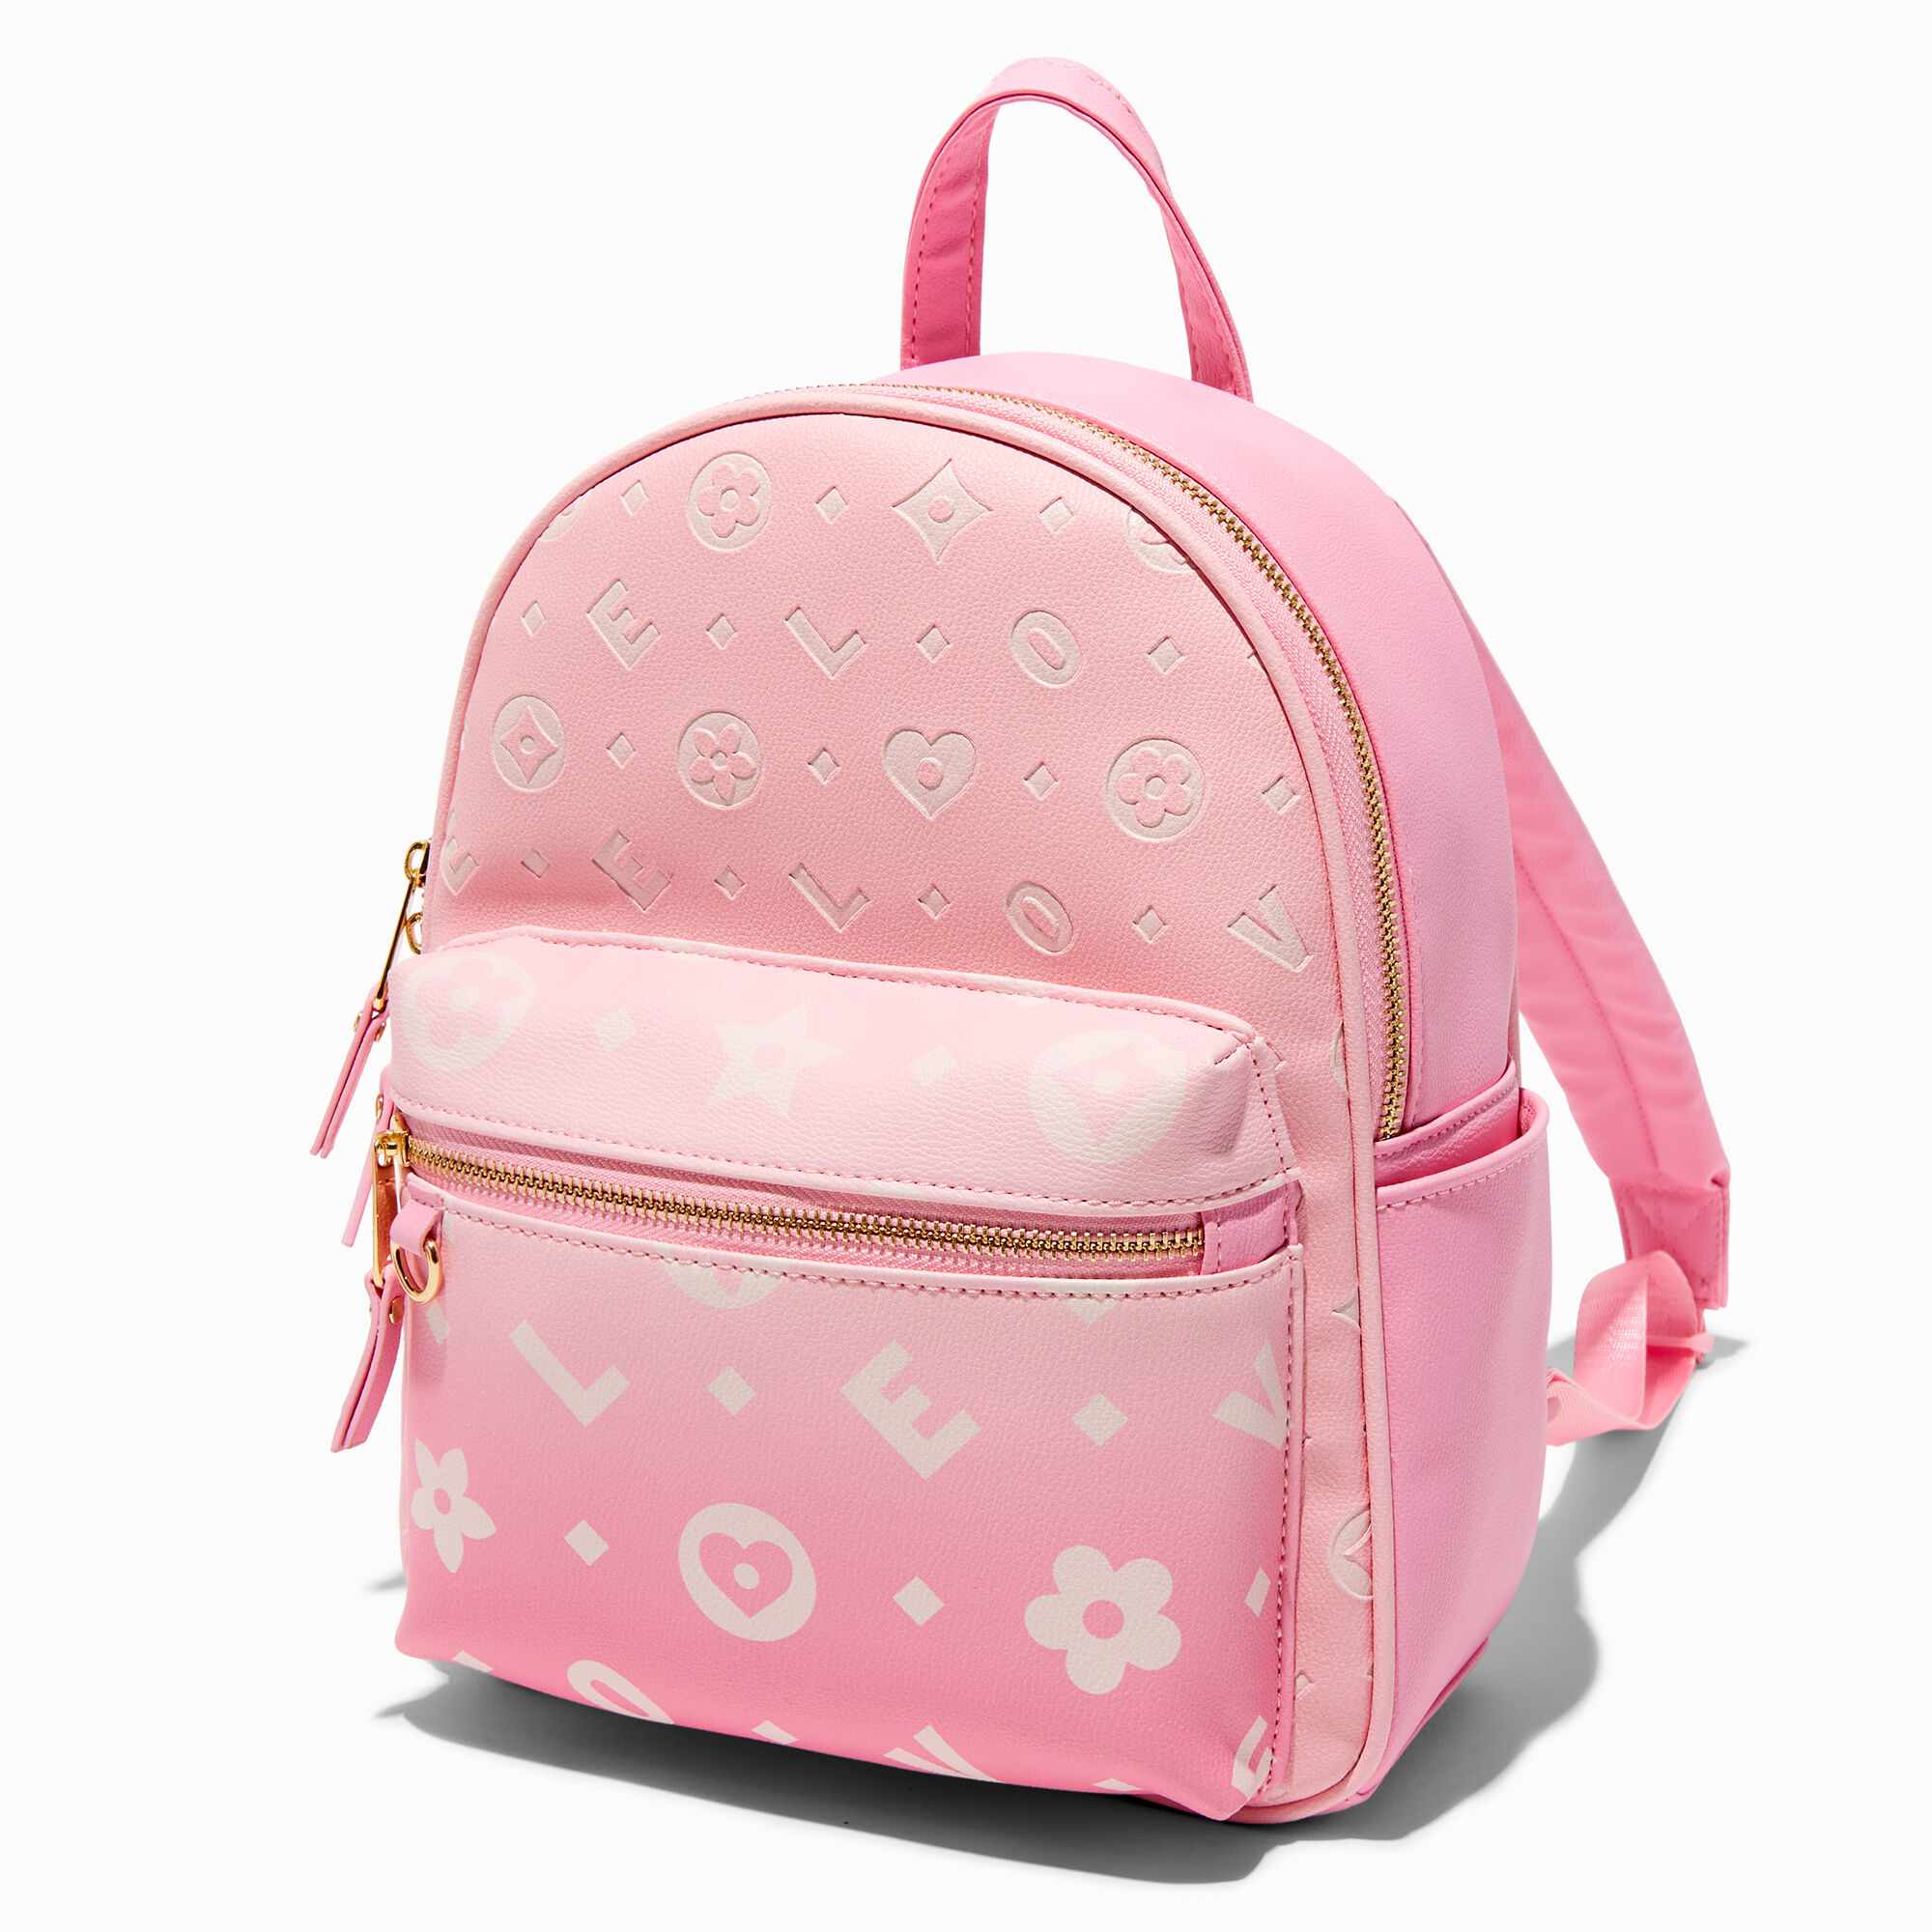 View Claires Status Icons Backpack Pink information